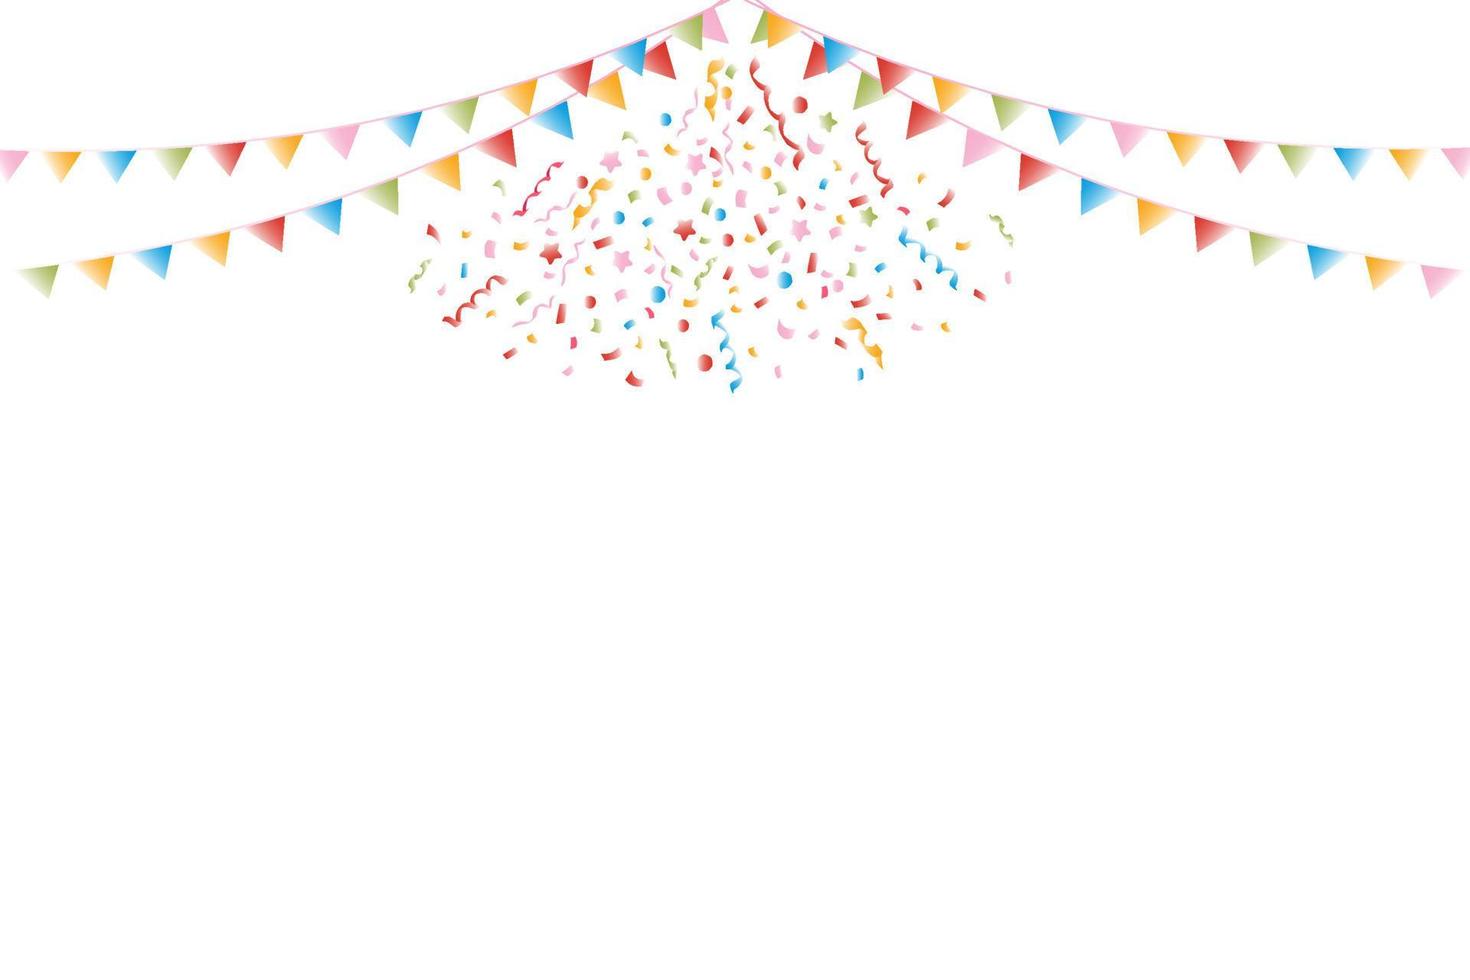 Colorful confetti explosion on a white background with multicolored flags, festive pattern. vector